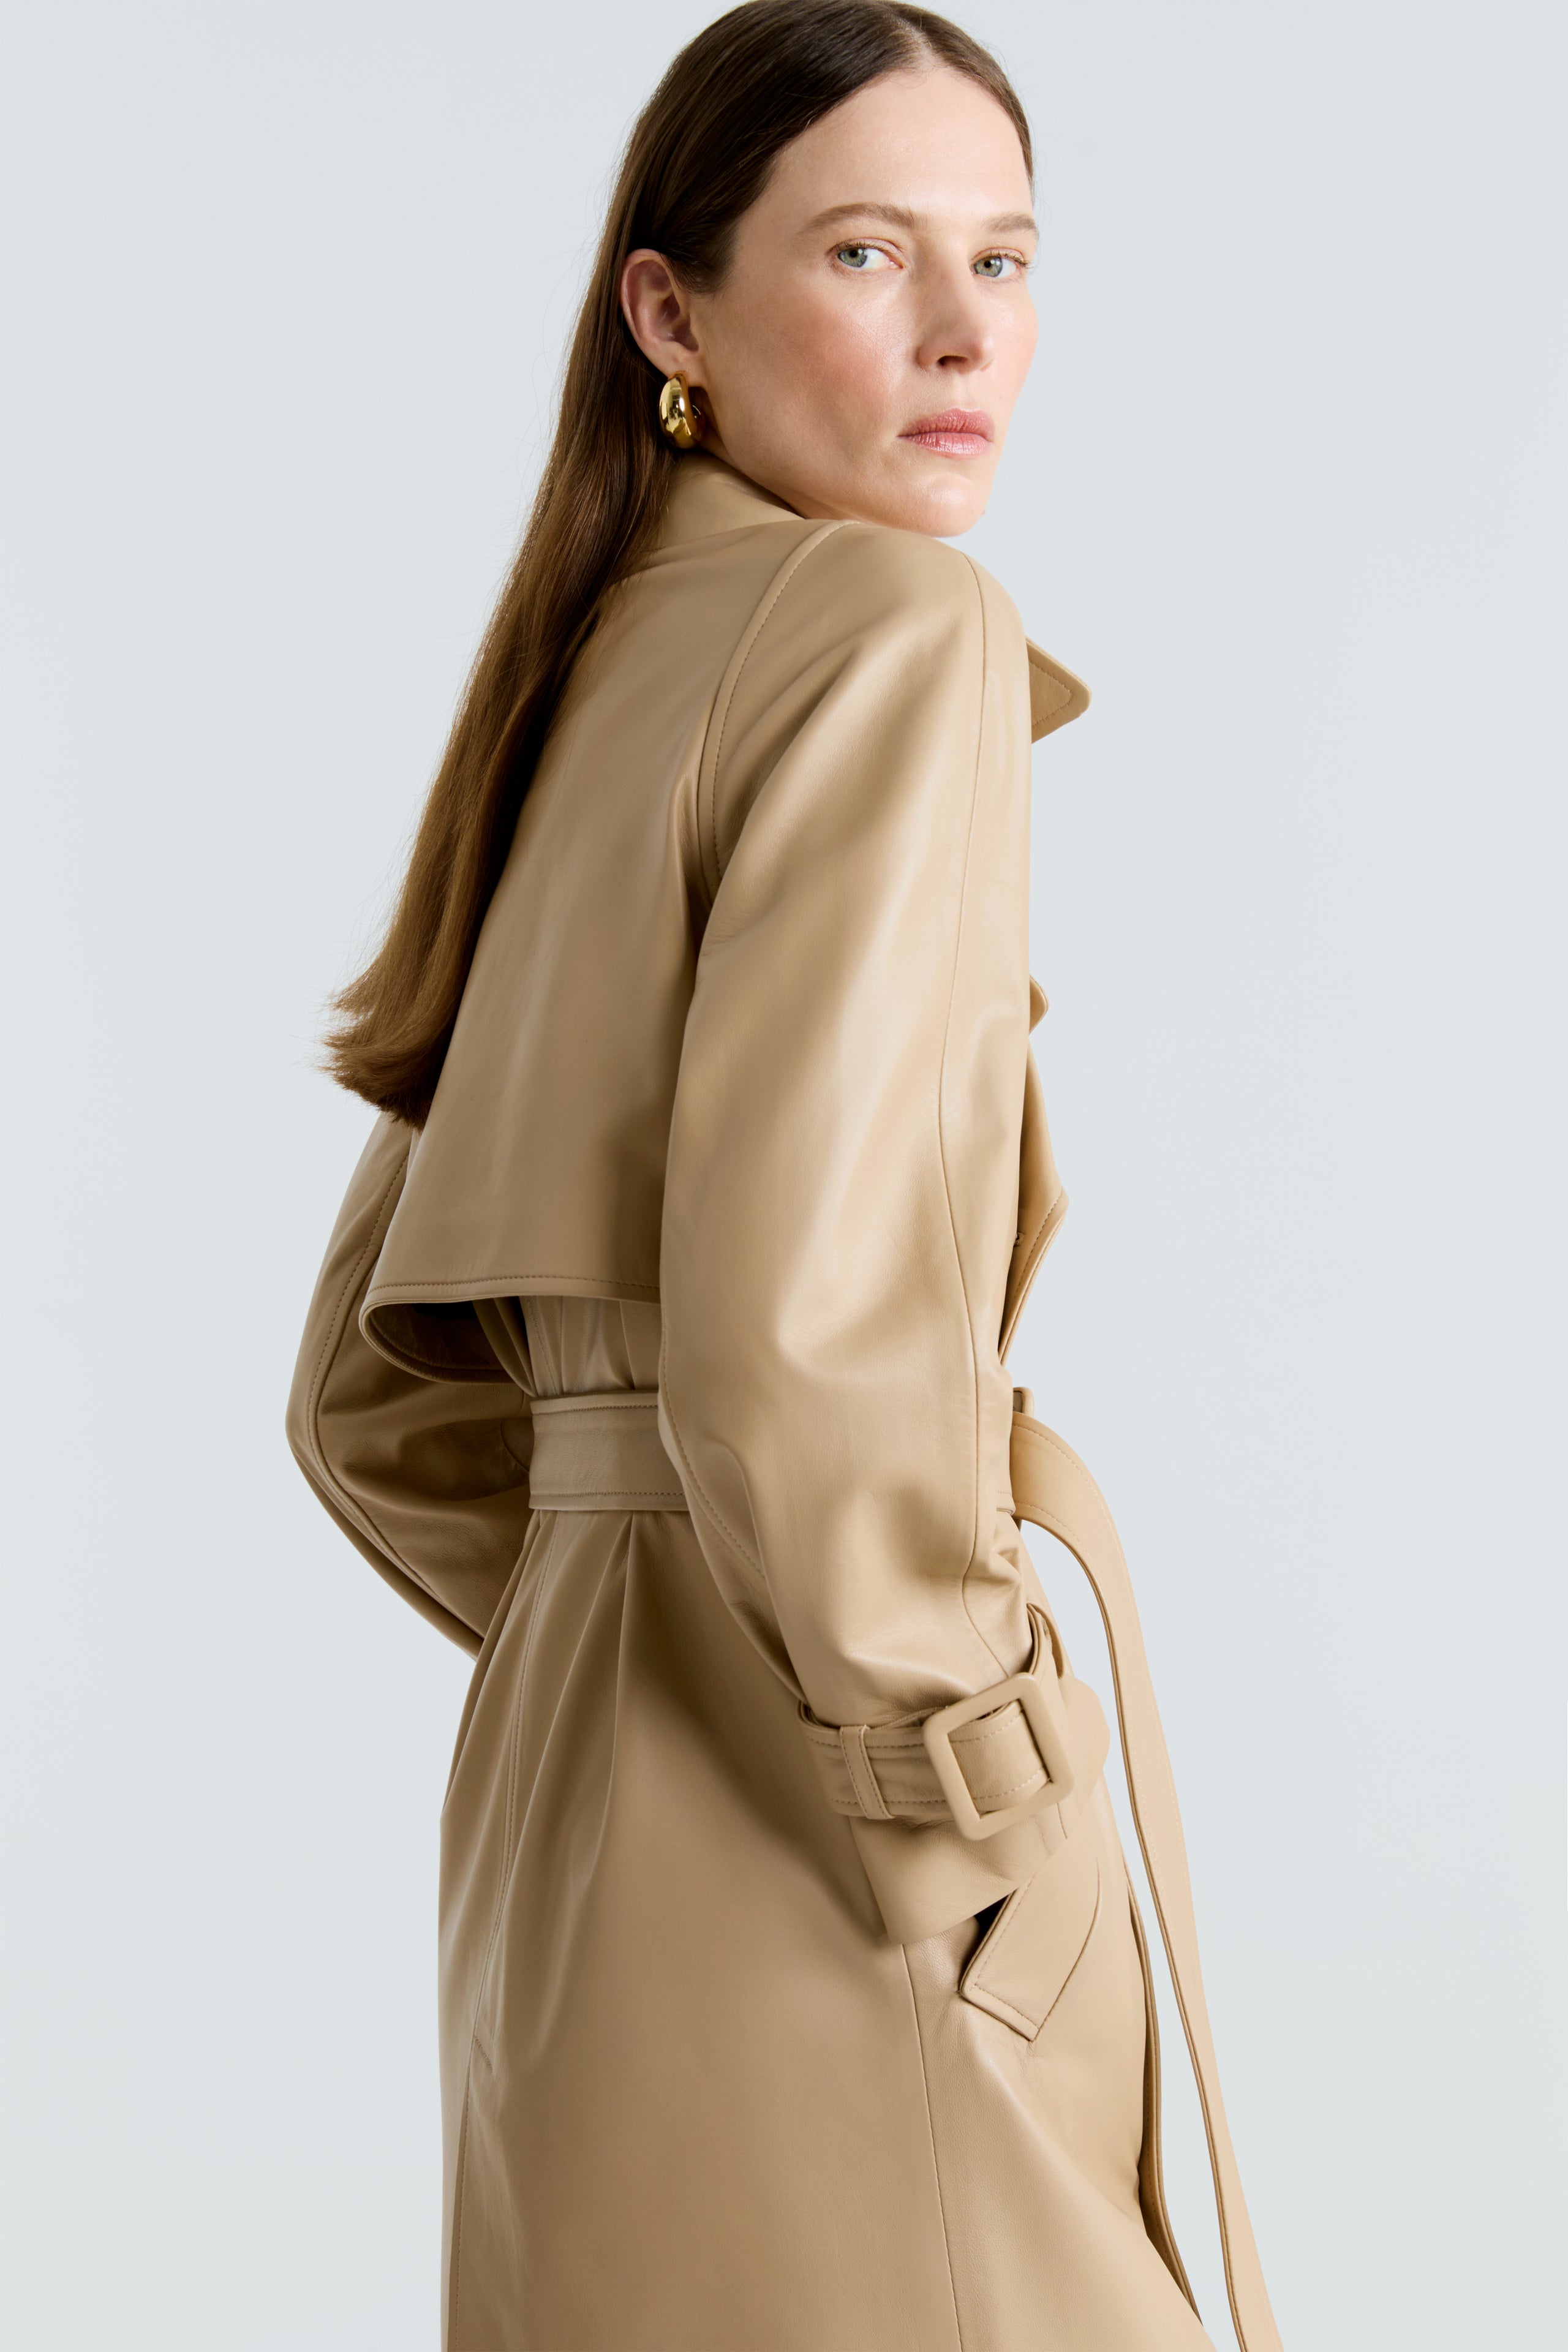 Model is wearing the Henri Beige Leather Trench Coat Close Up